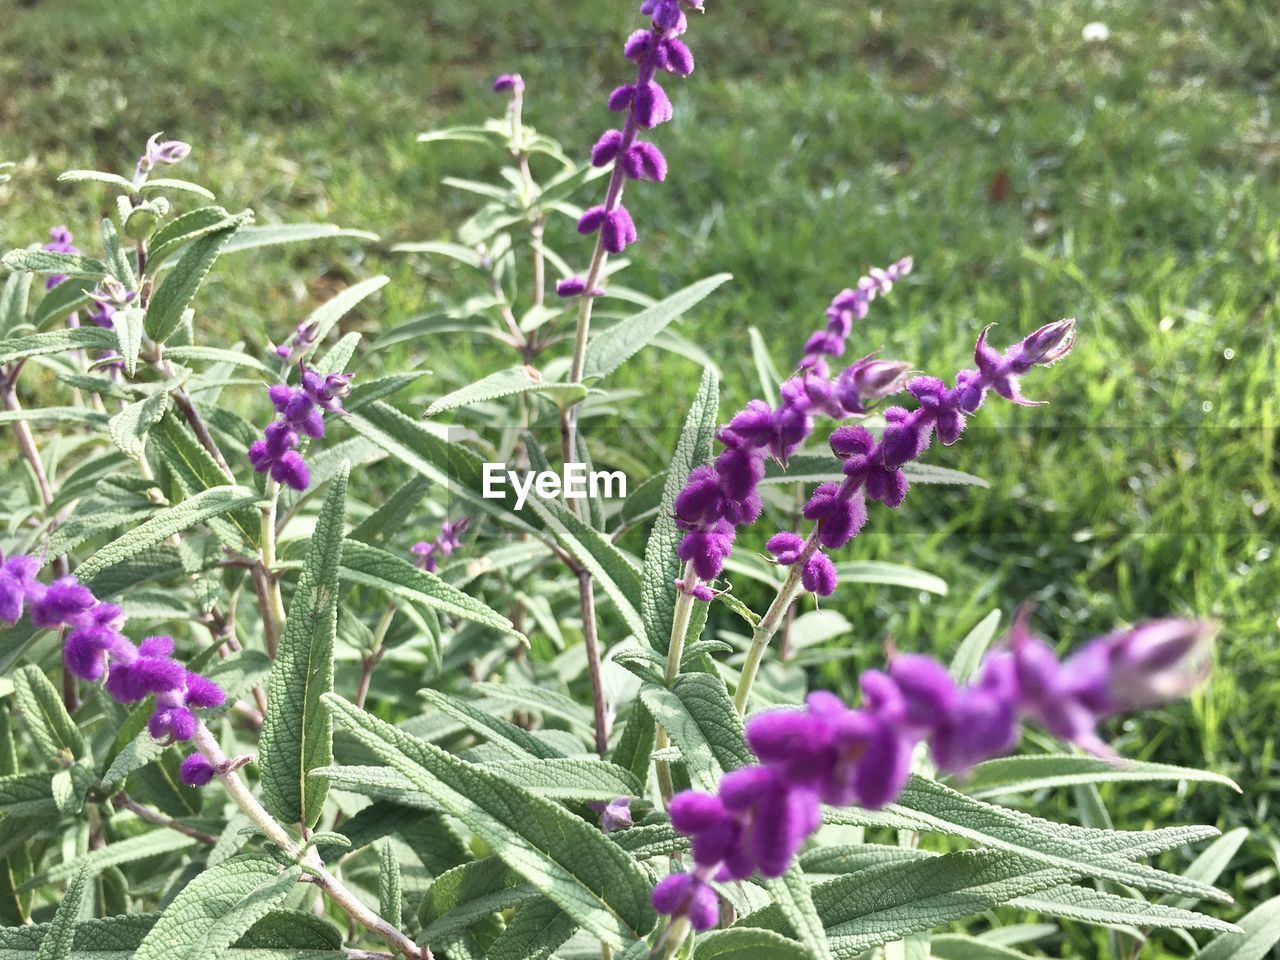 CLOSE-UP OF PURPLE FLOWERING PLANTS AGAINST BLURRED BACKGROUND